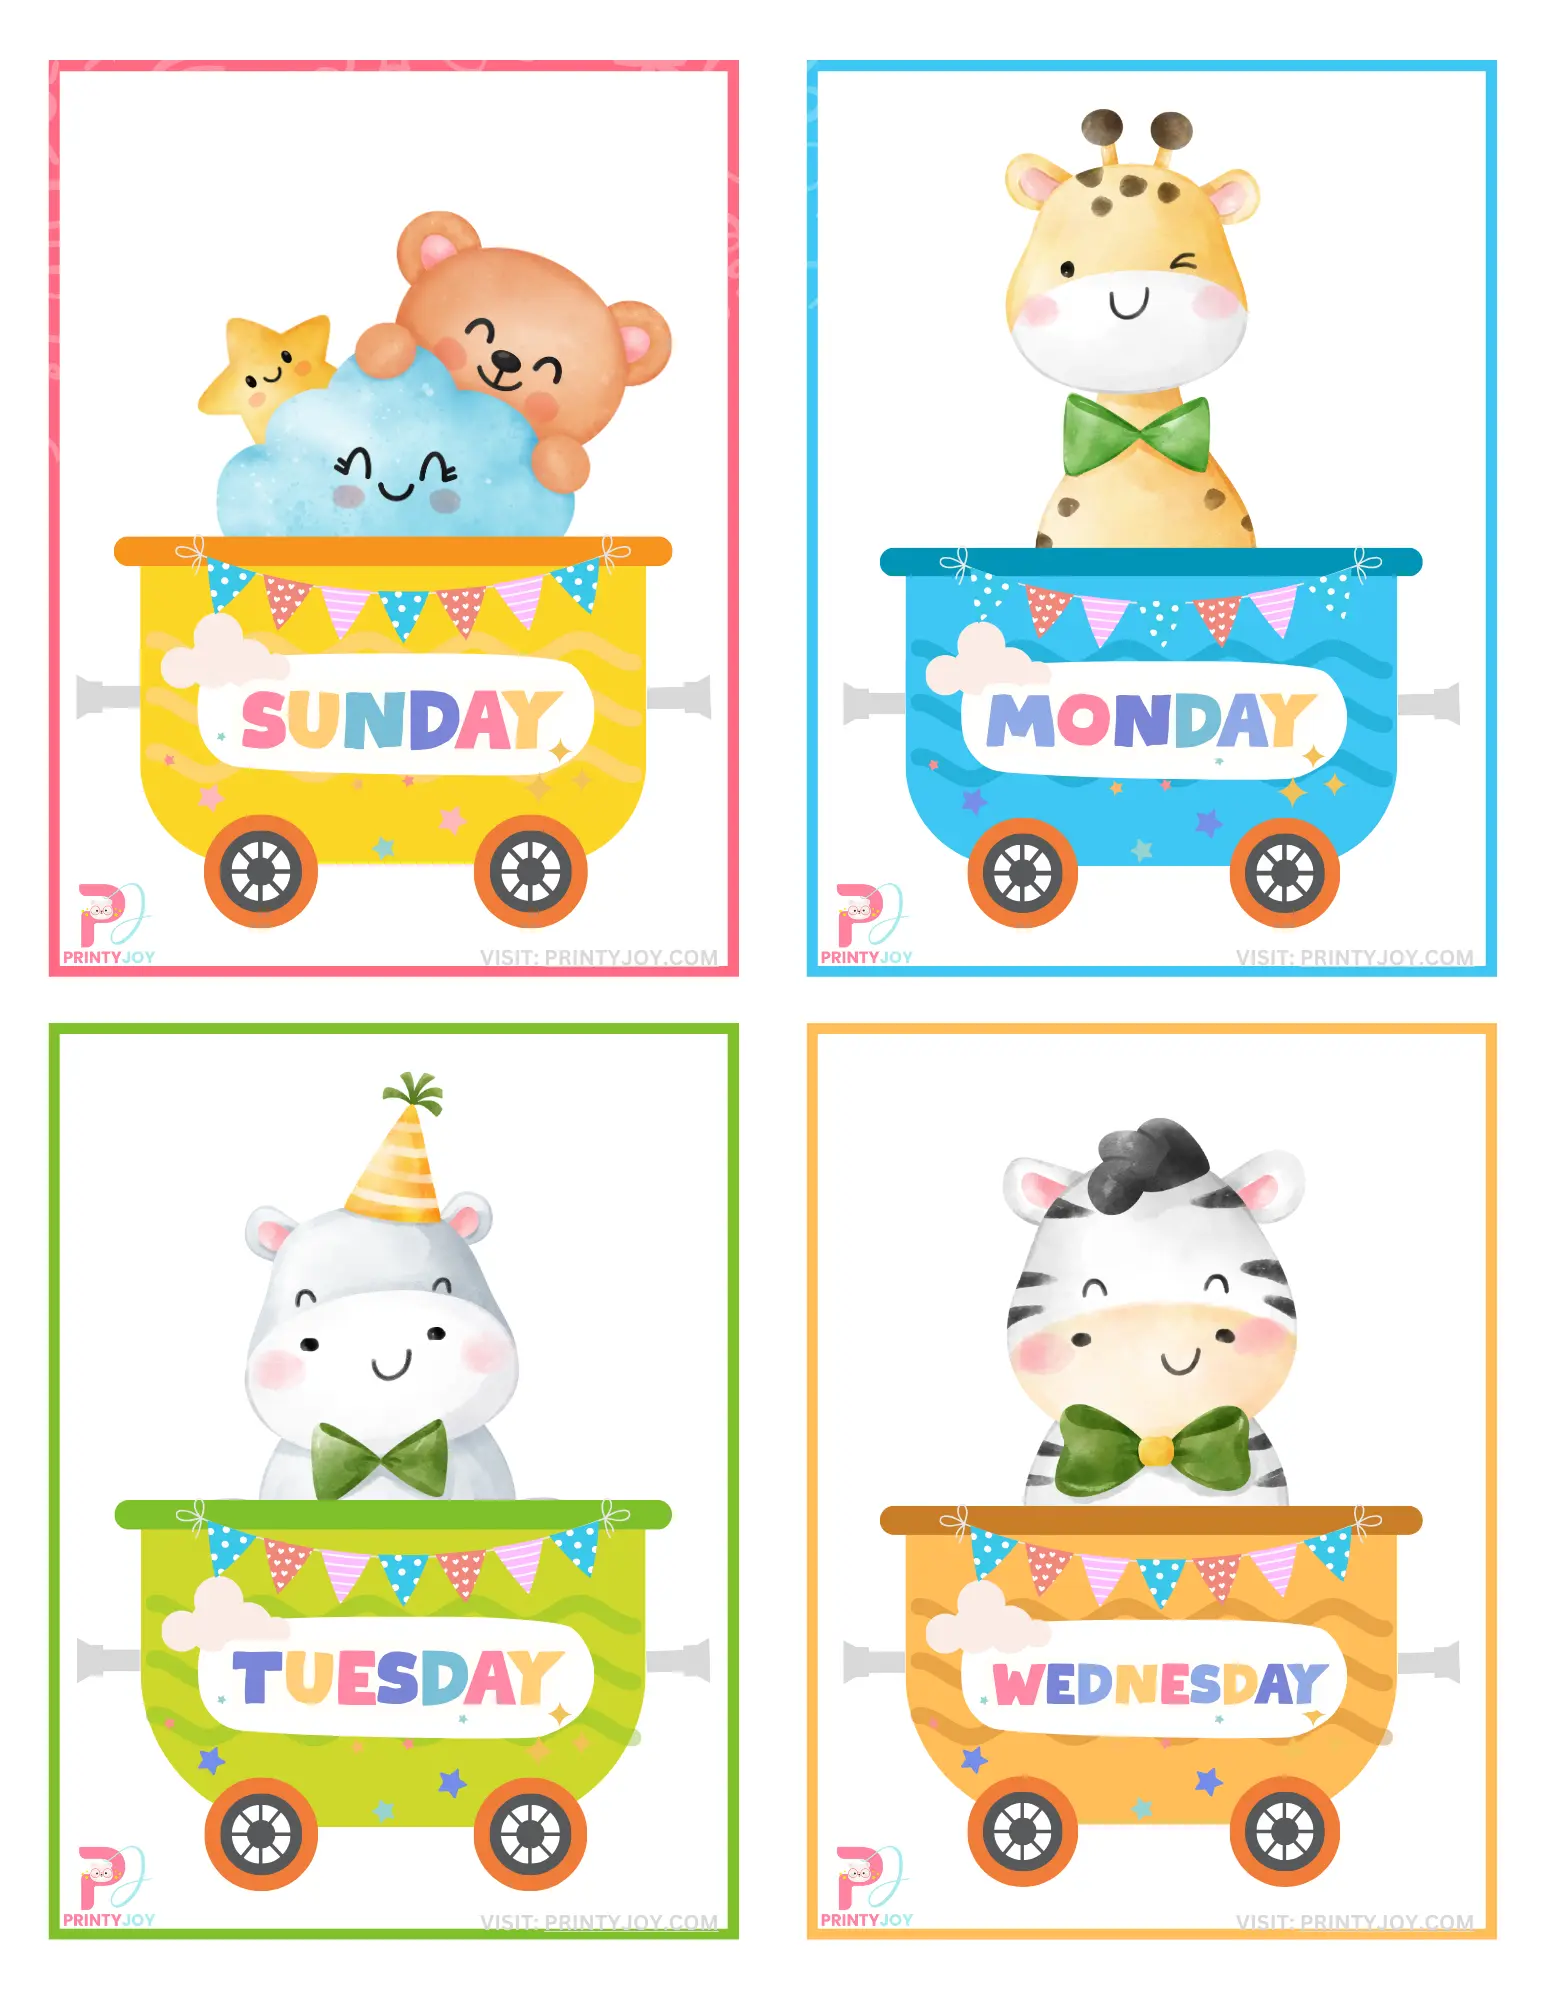 Days of The Week Flashcards For Kids